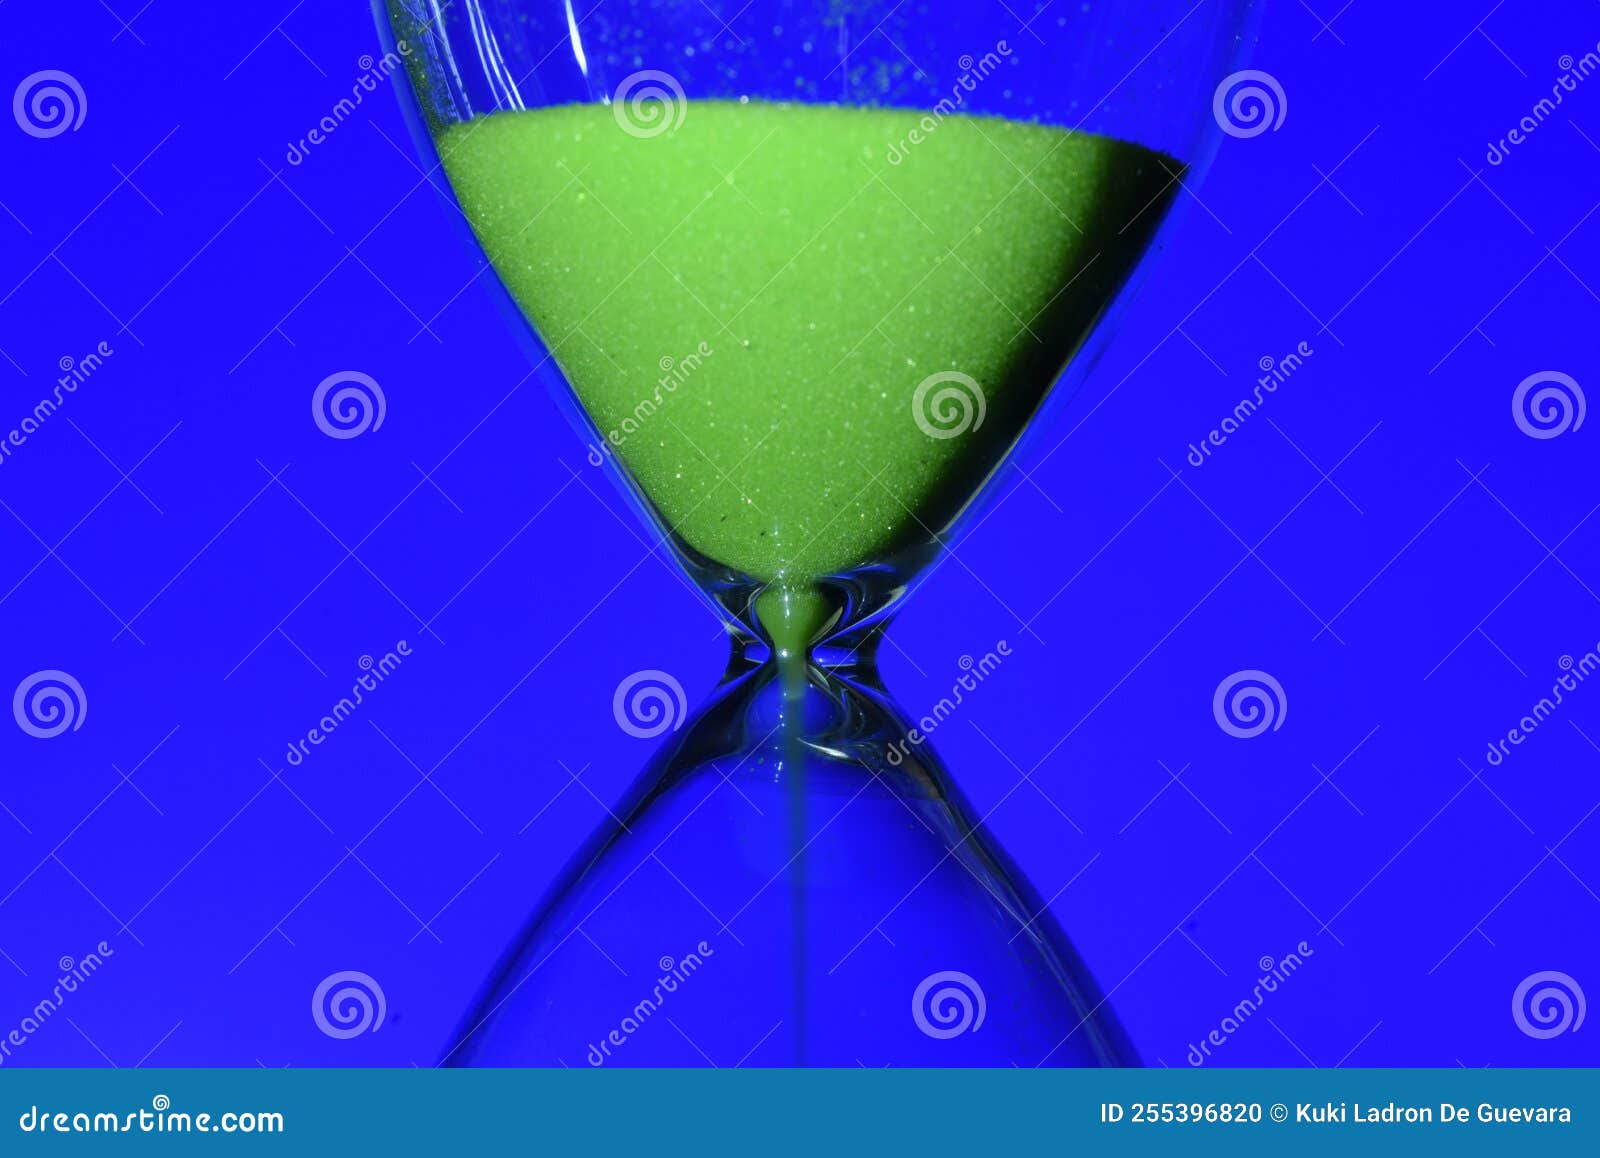 green hourglass, counting the time